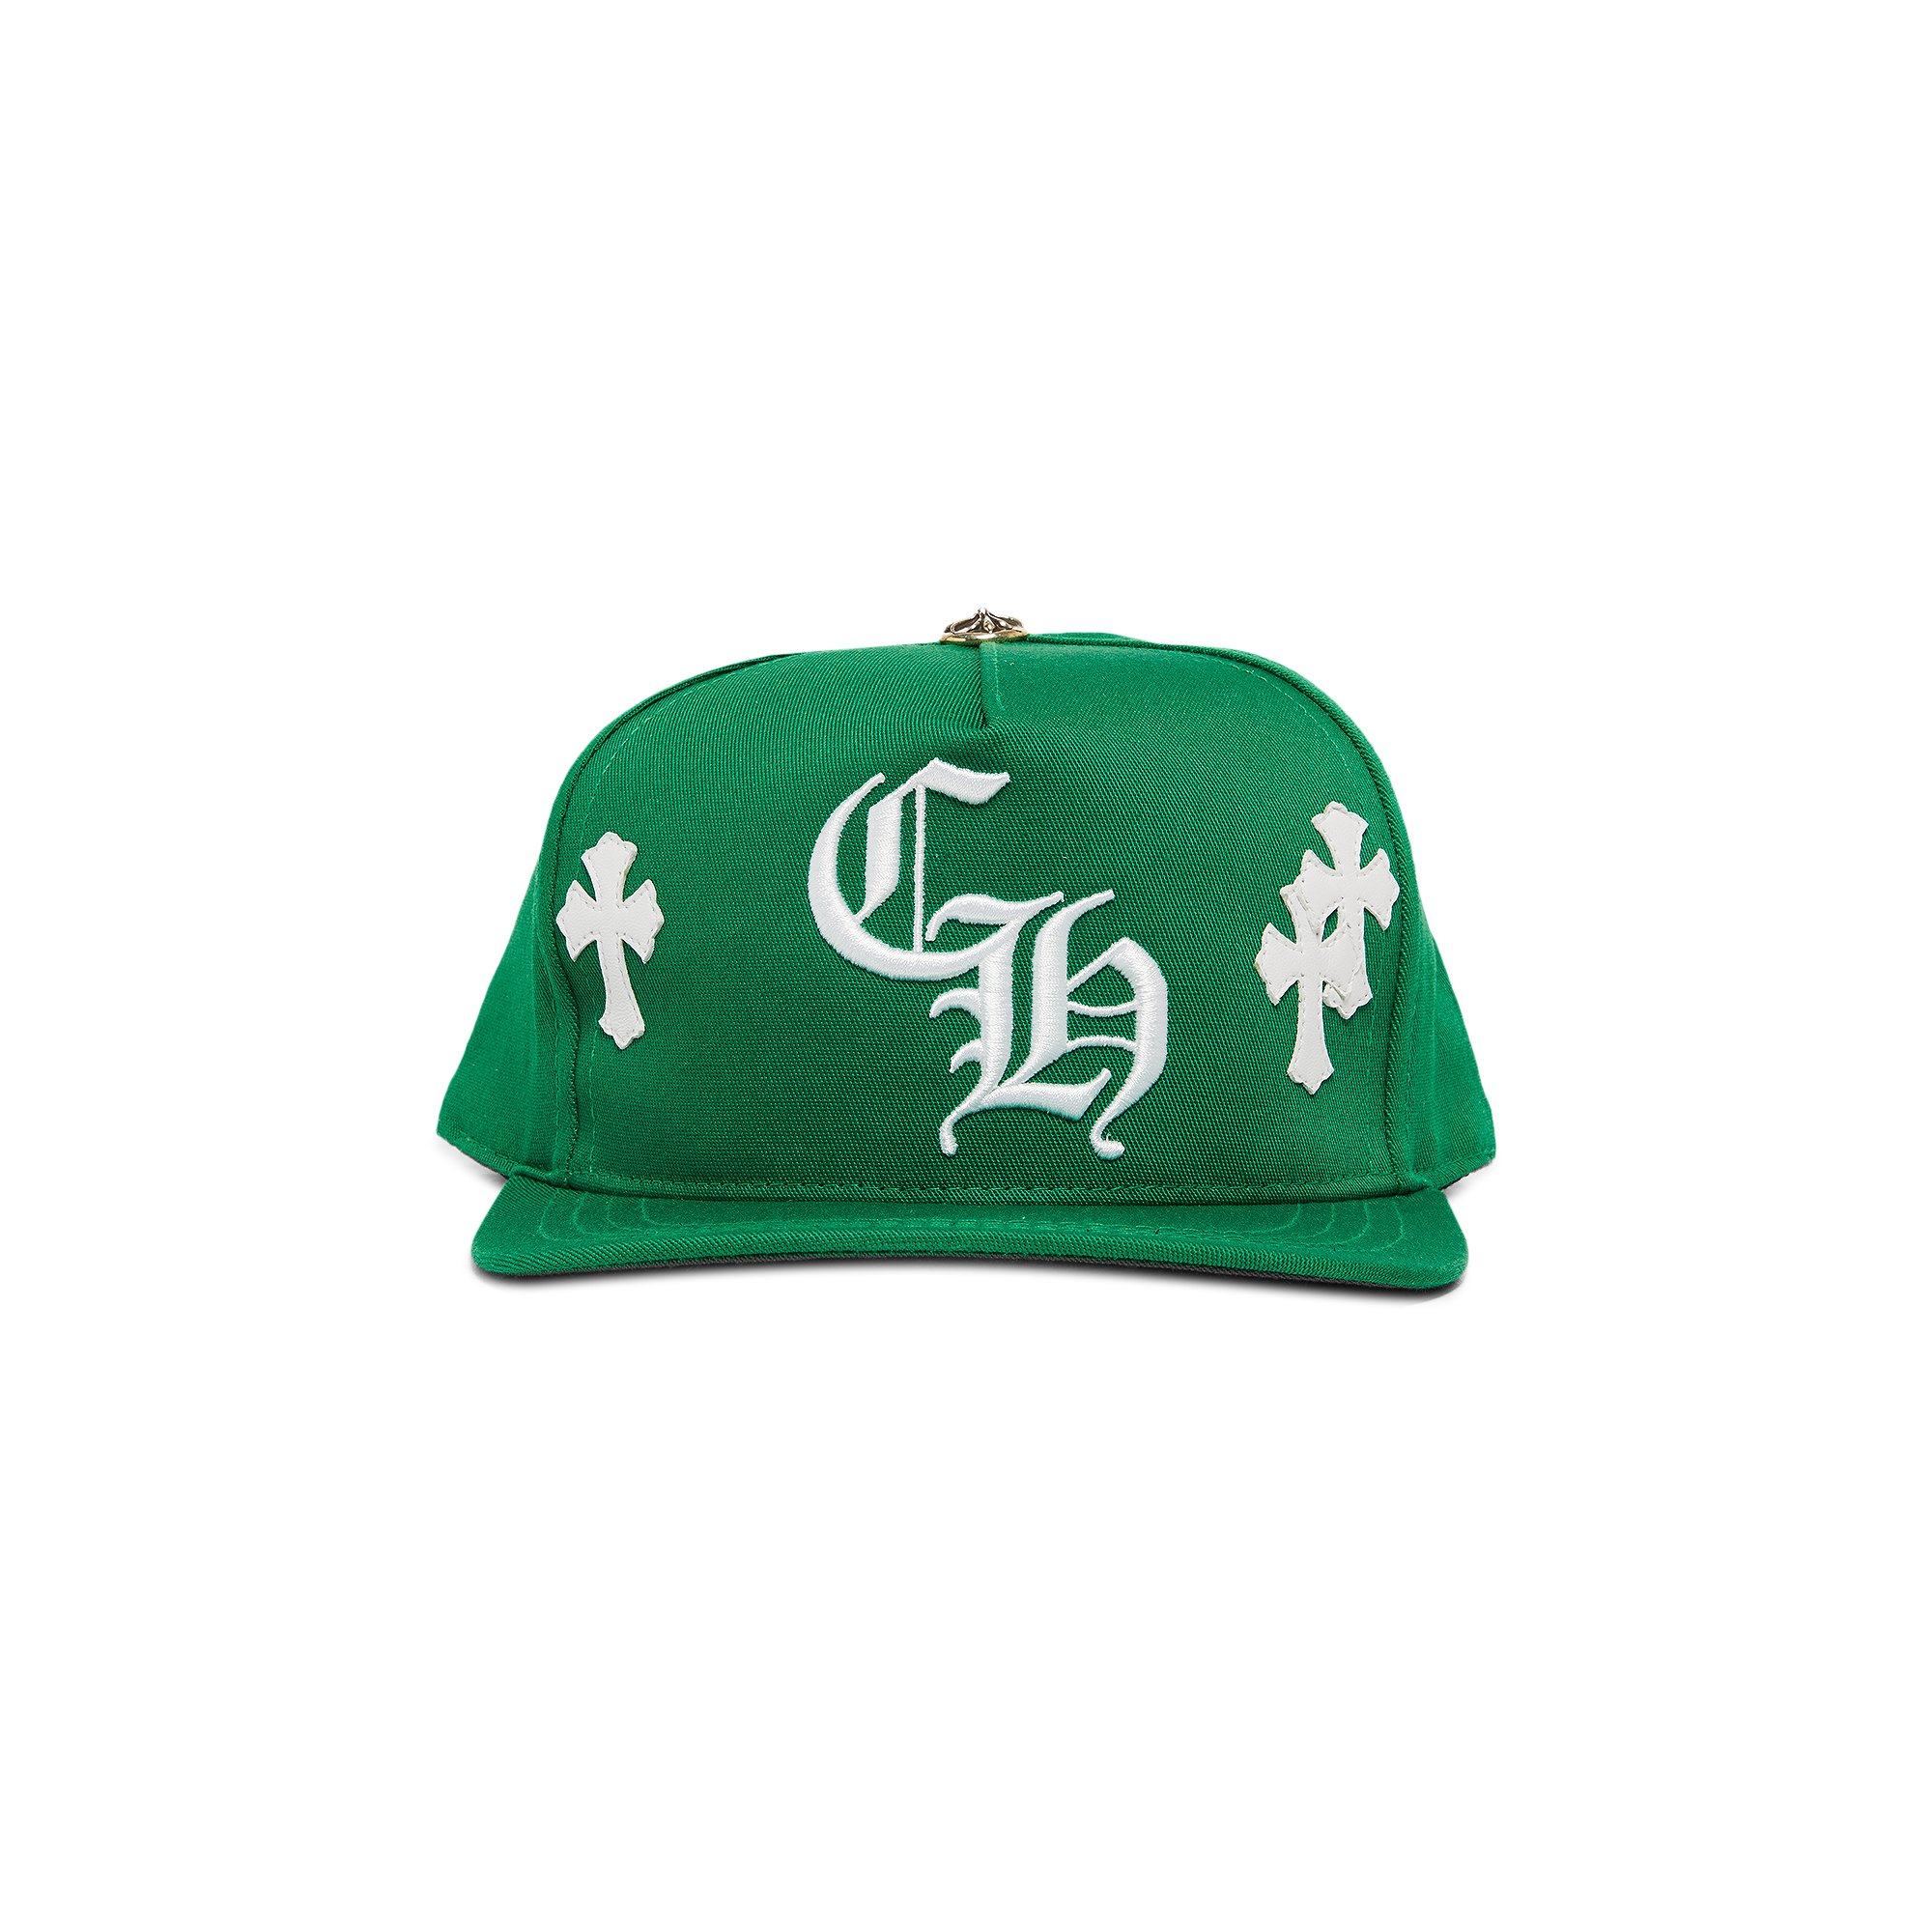 Chrome Hearts Cross Patch Hat 'Green'